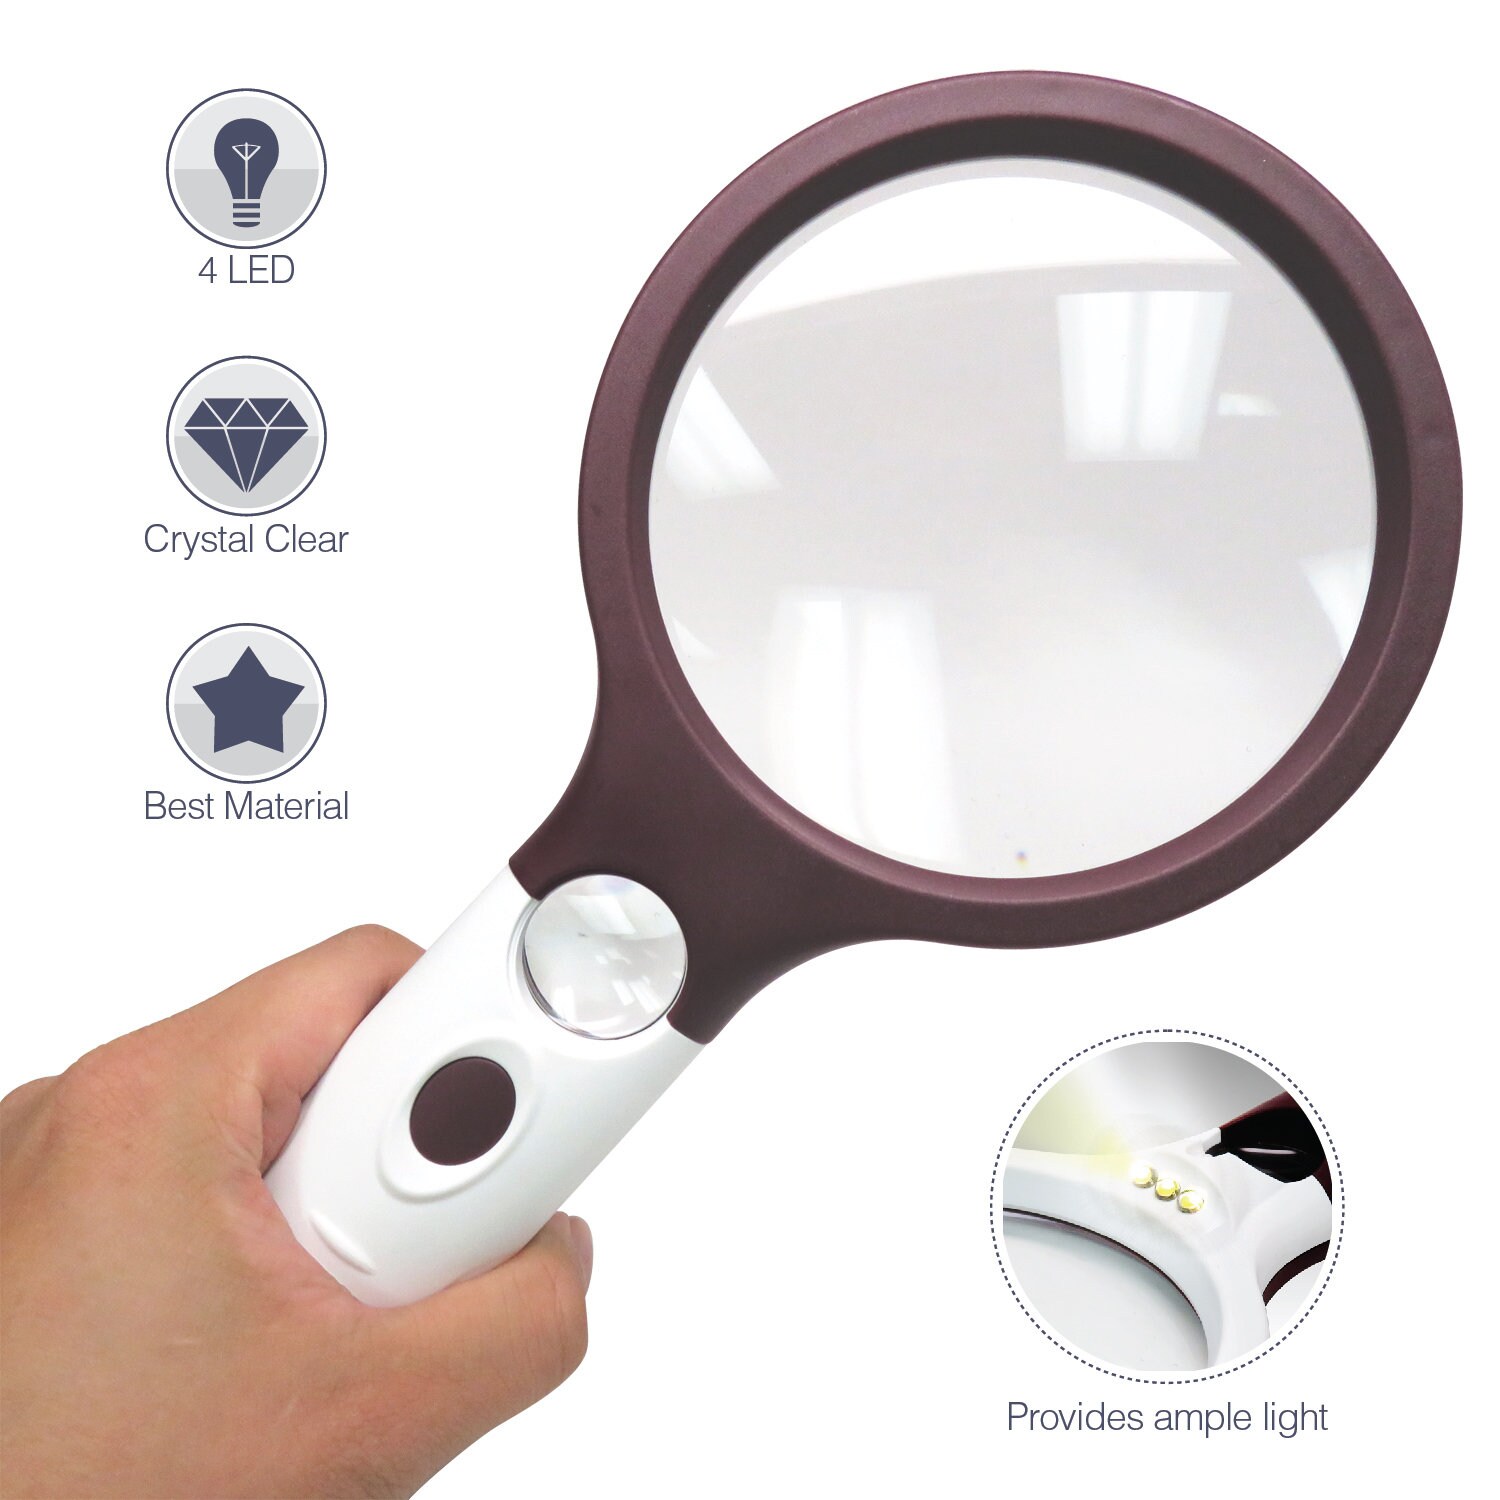 VISION AID Magnifying Glasses With Light Hands Free Magnifier for